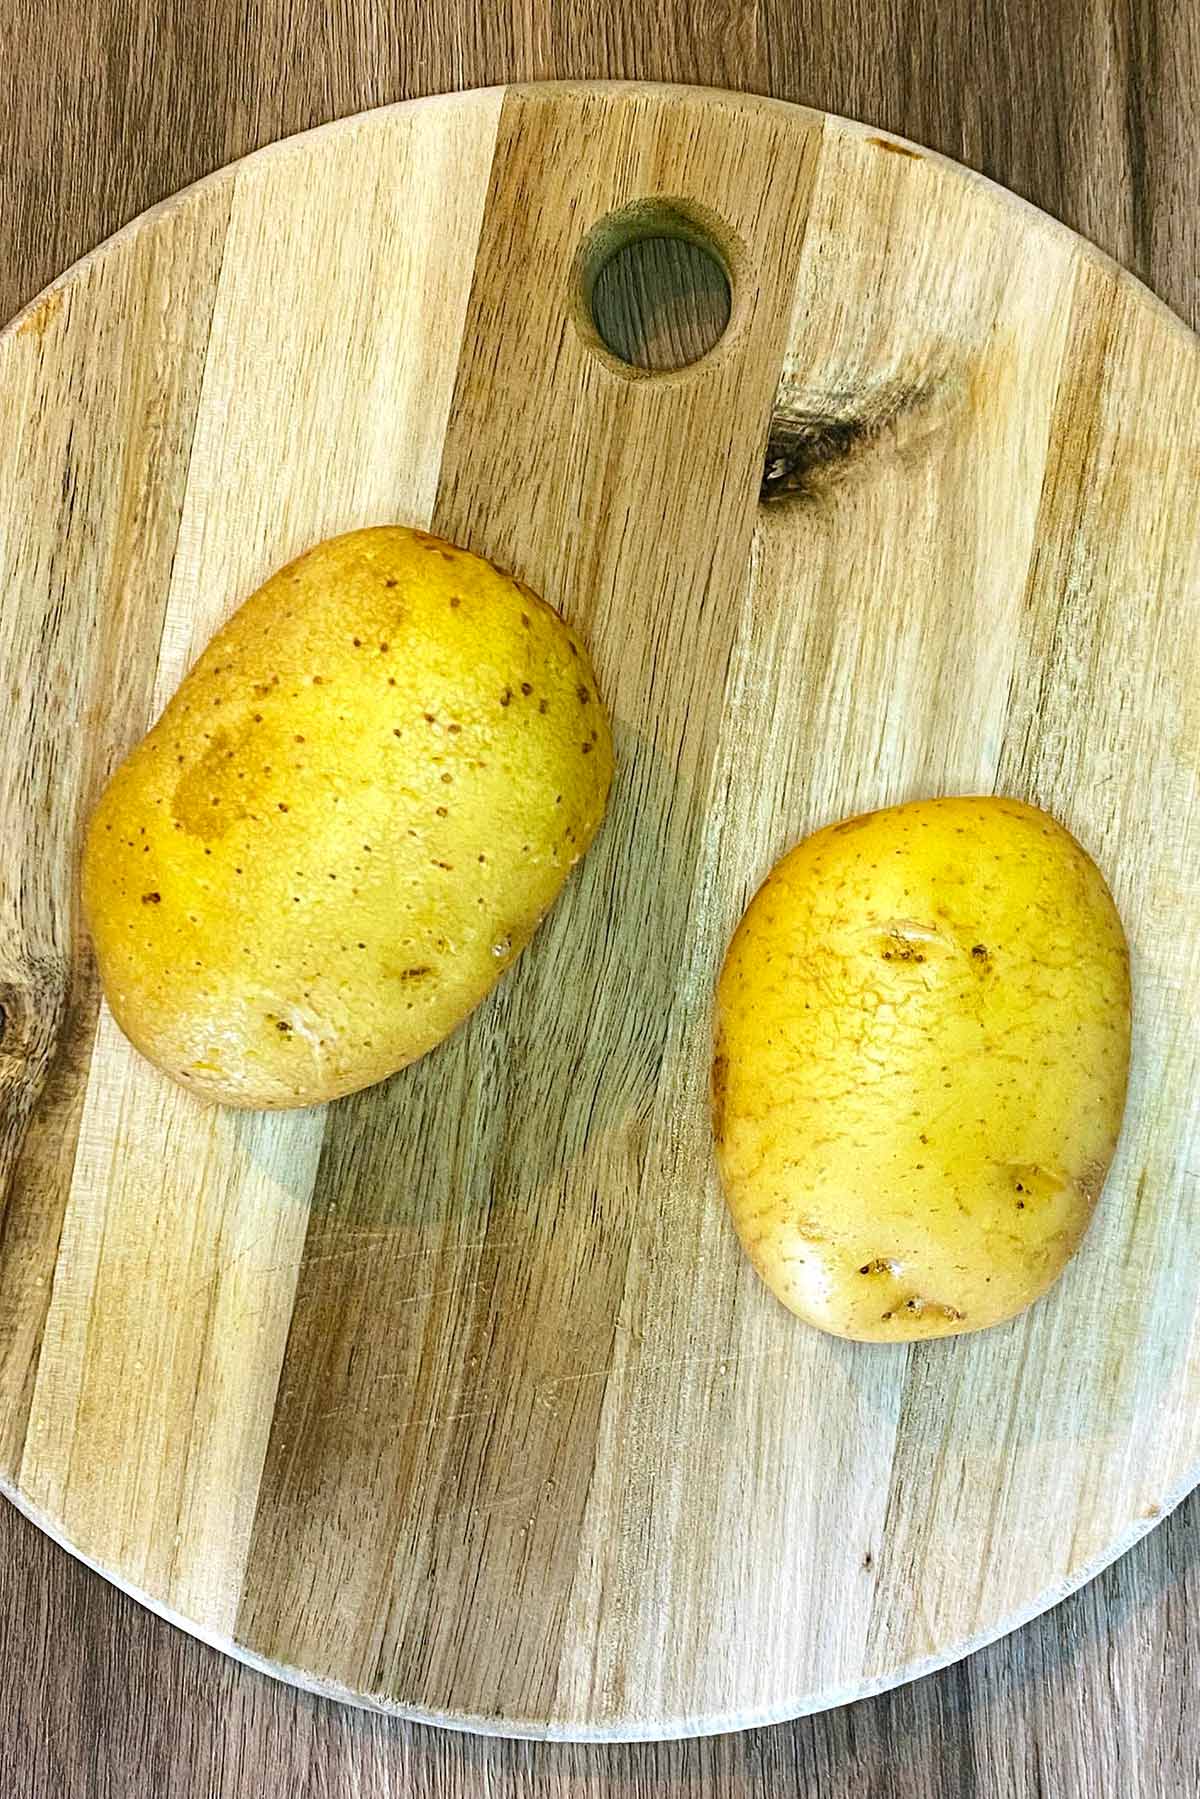 Two potatoes on a wooden board.